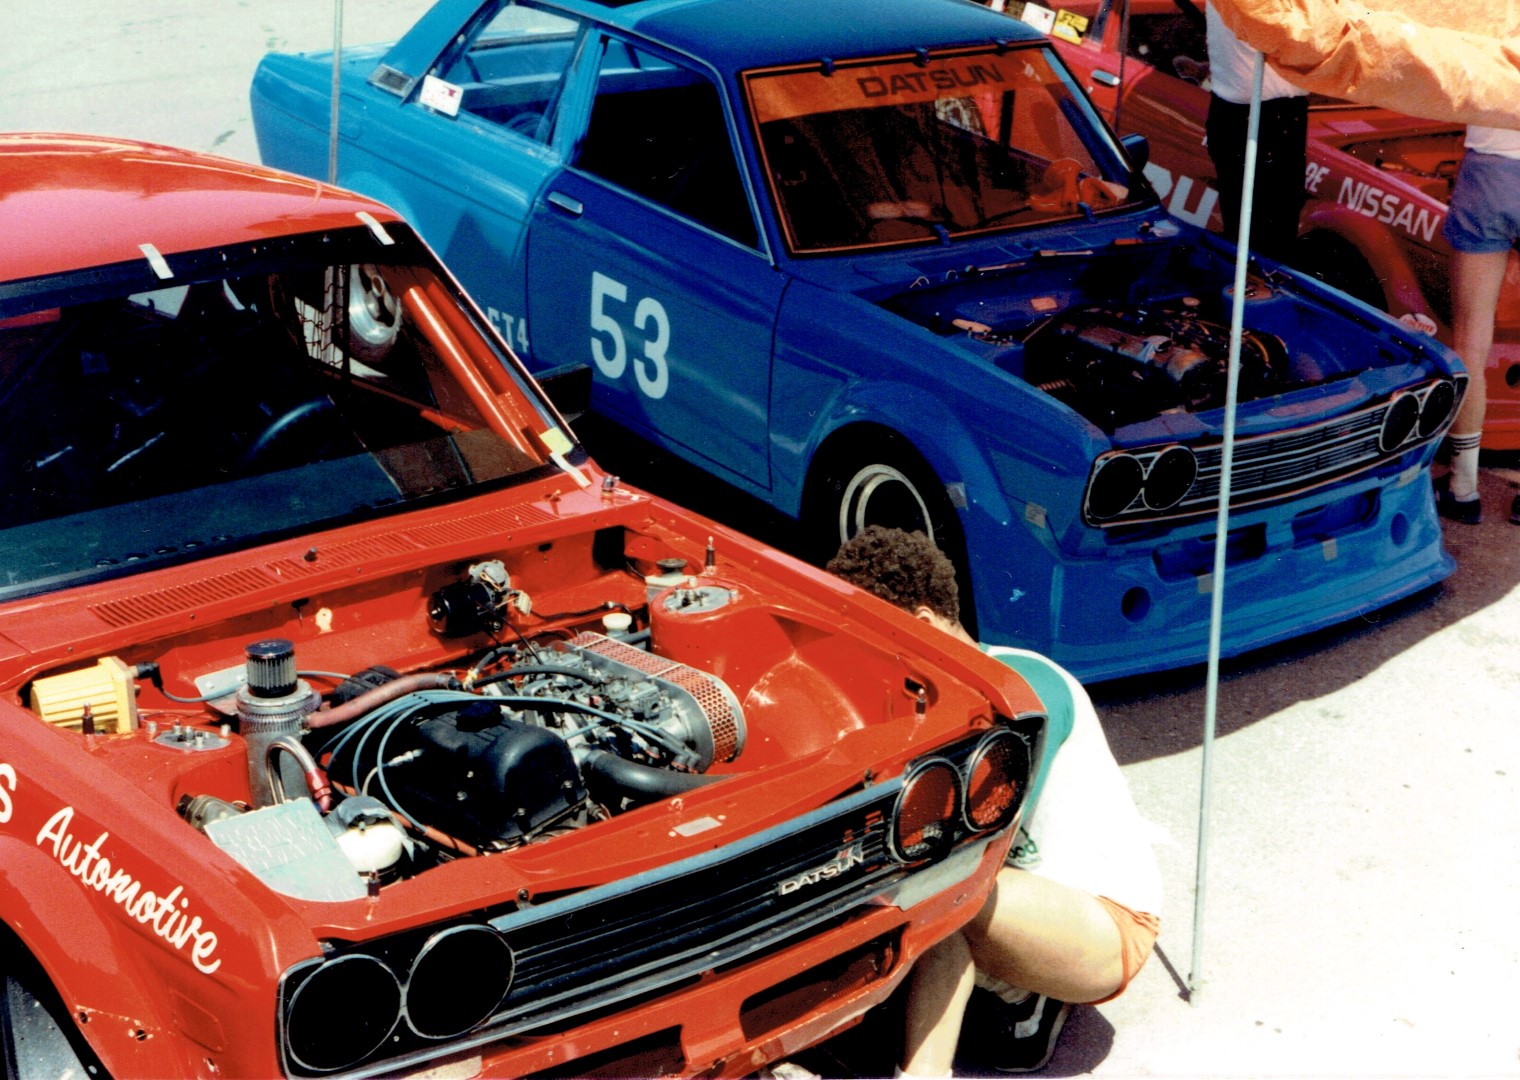 Georges working on his 510